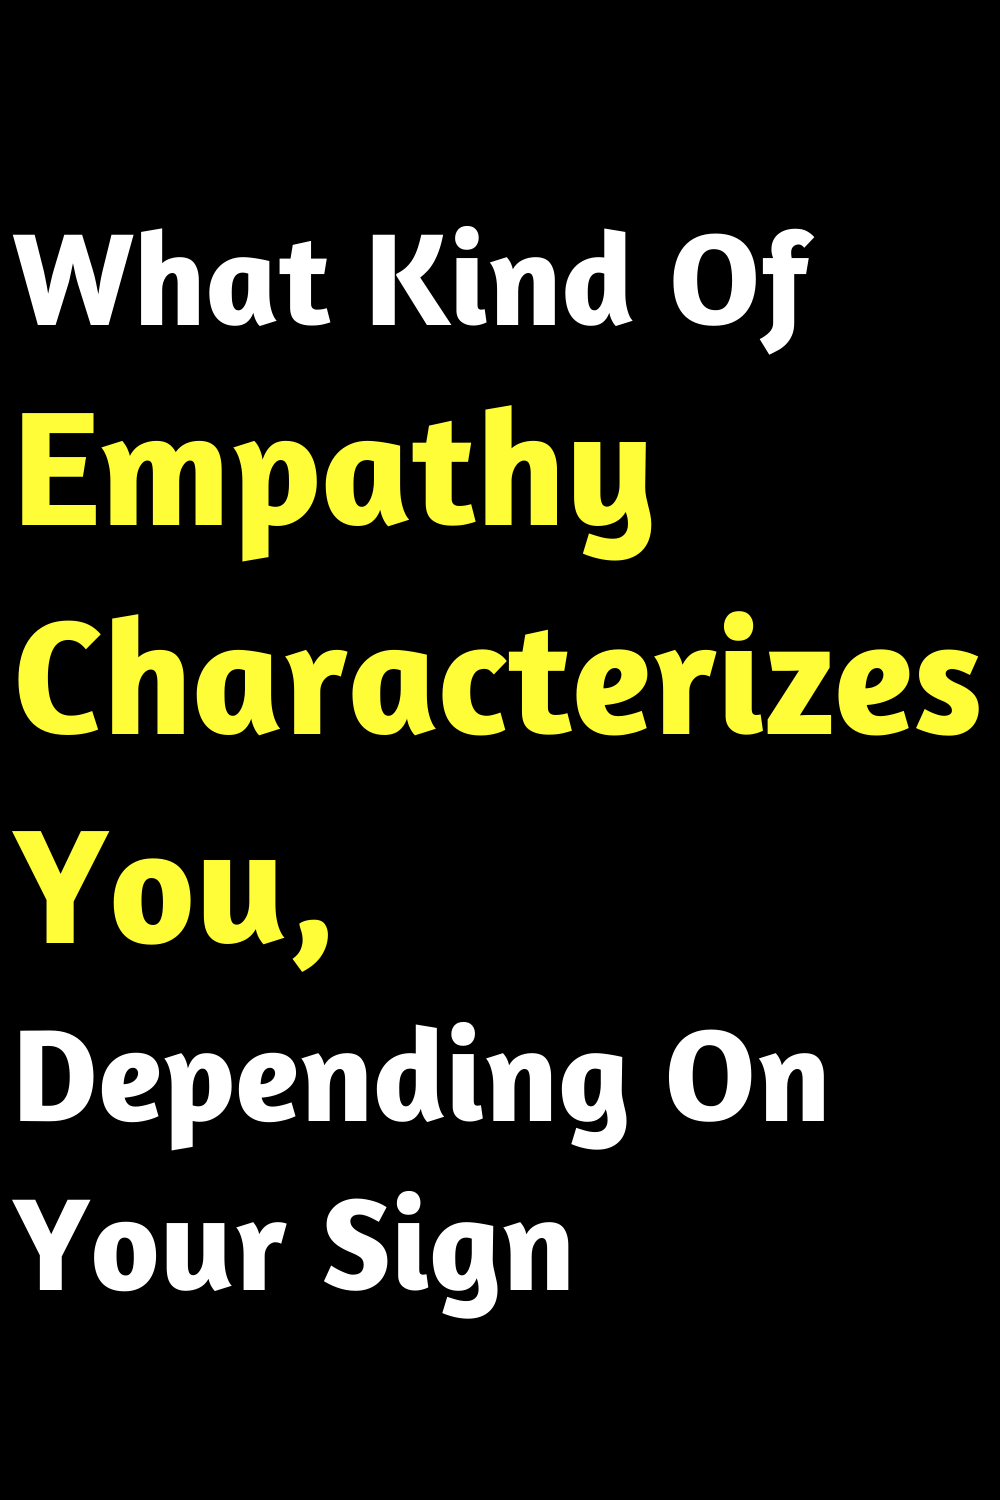 What Kind Of Empathy Characterizes You, Depending On Your Sign